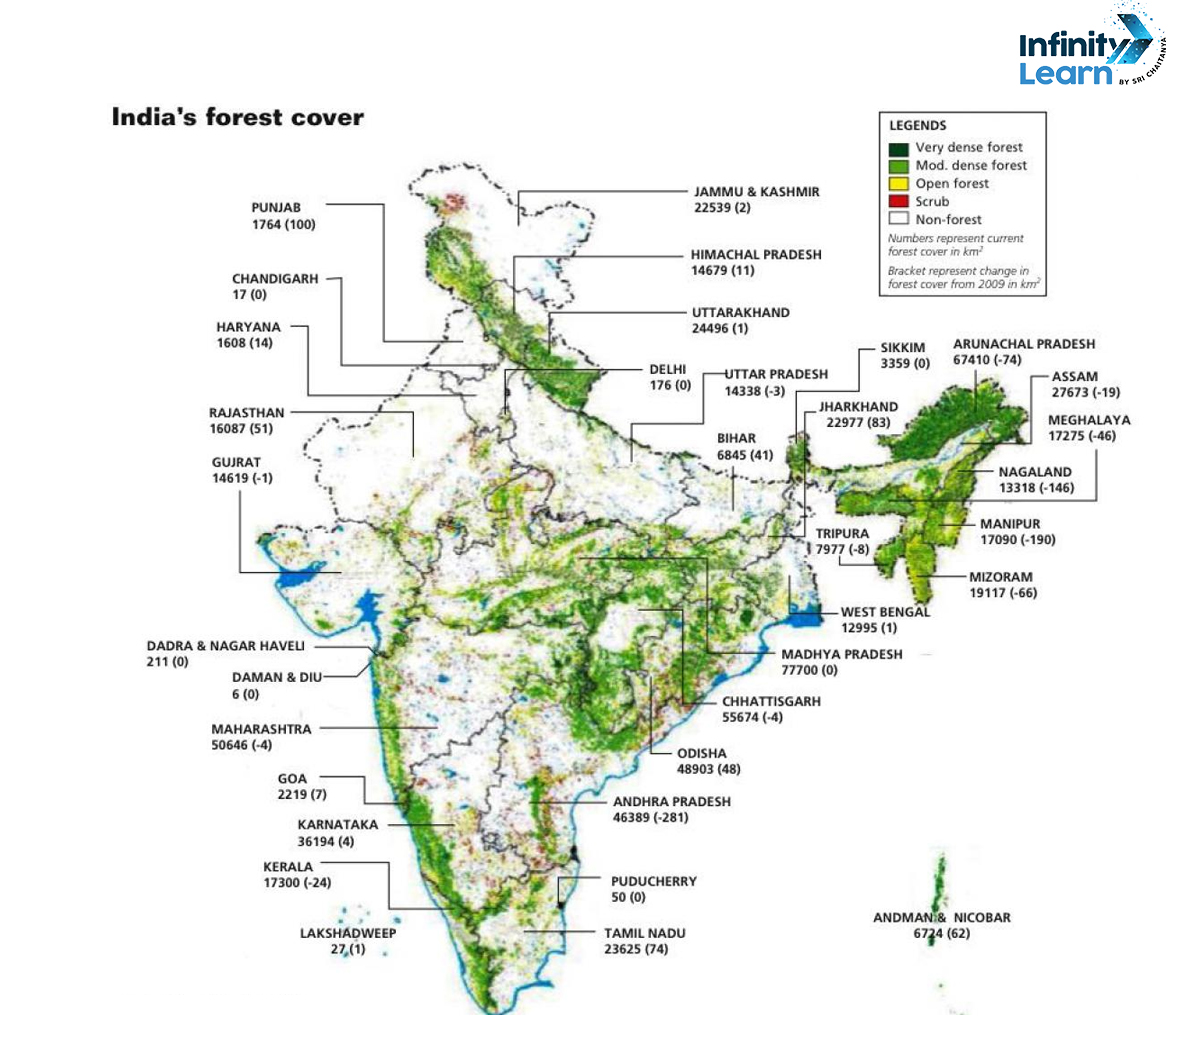 India's Forest Cover